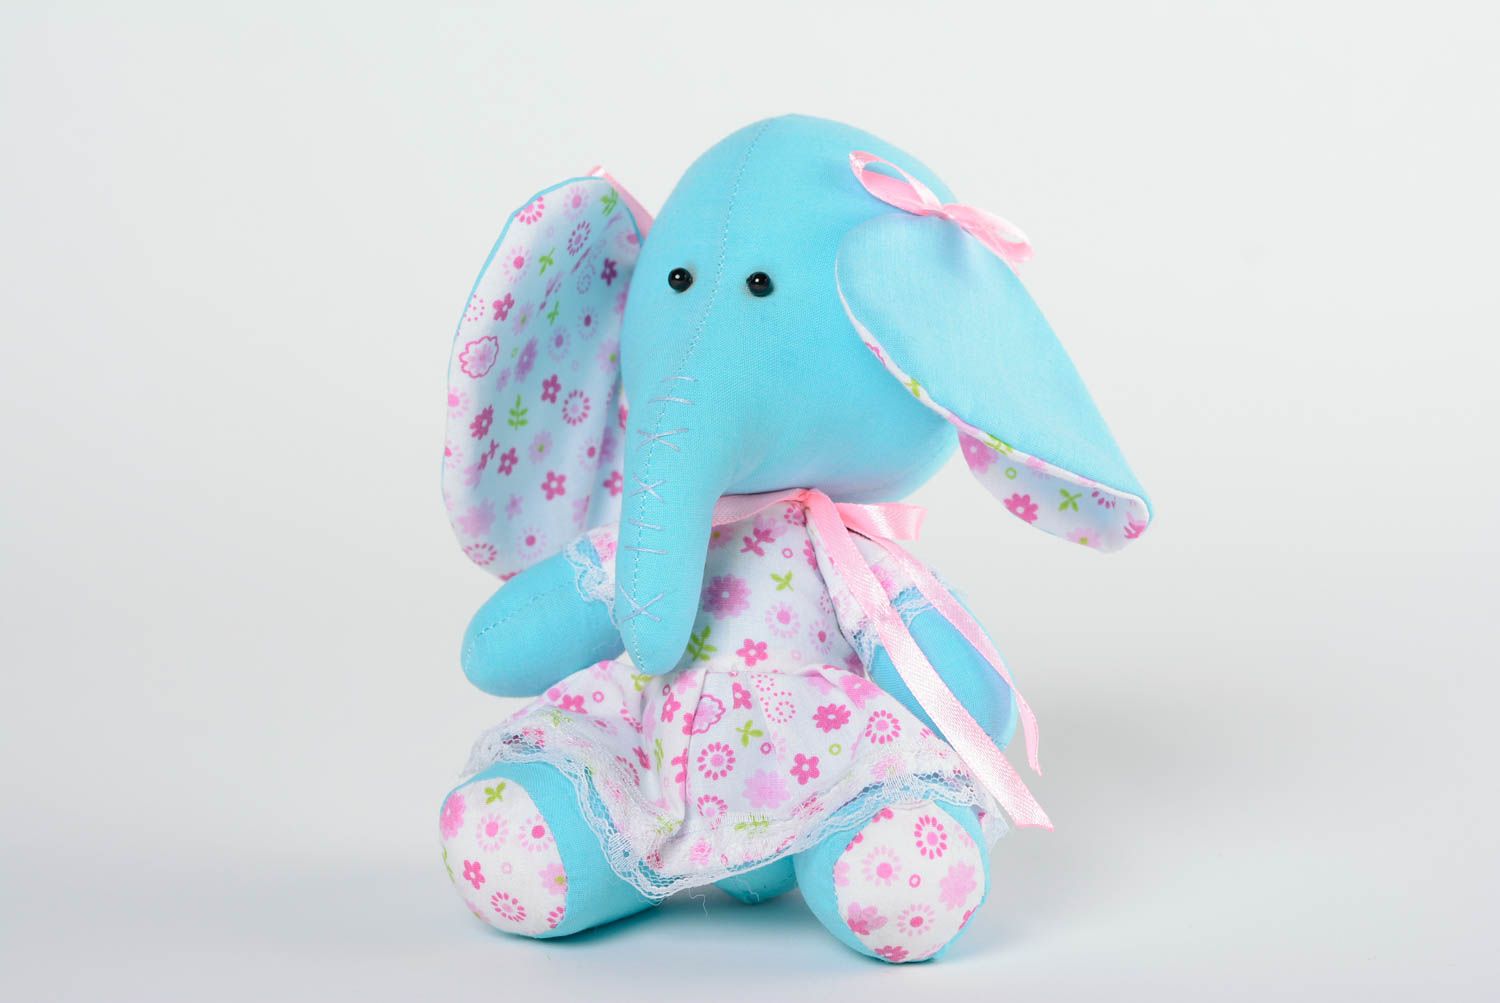 Handmade small cotton fabric soft toy blue elephant girl in floral dress photo 1